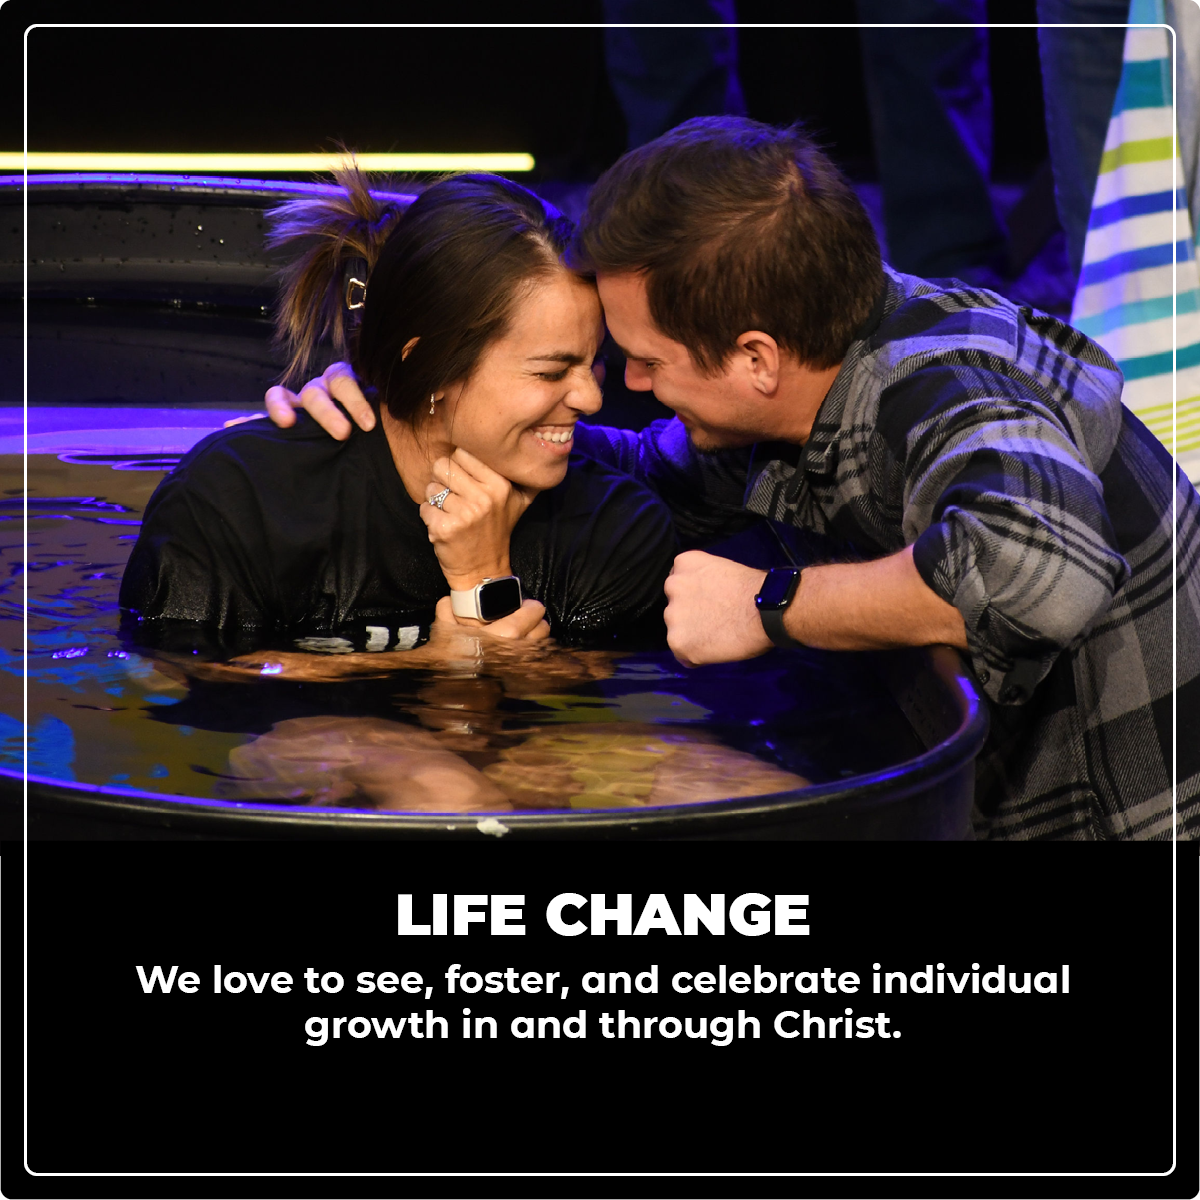 Life change: We love to see, foster, and celebrate individual growth in and through Christ.